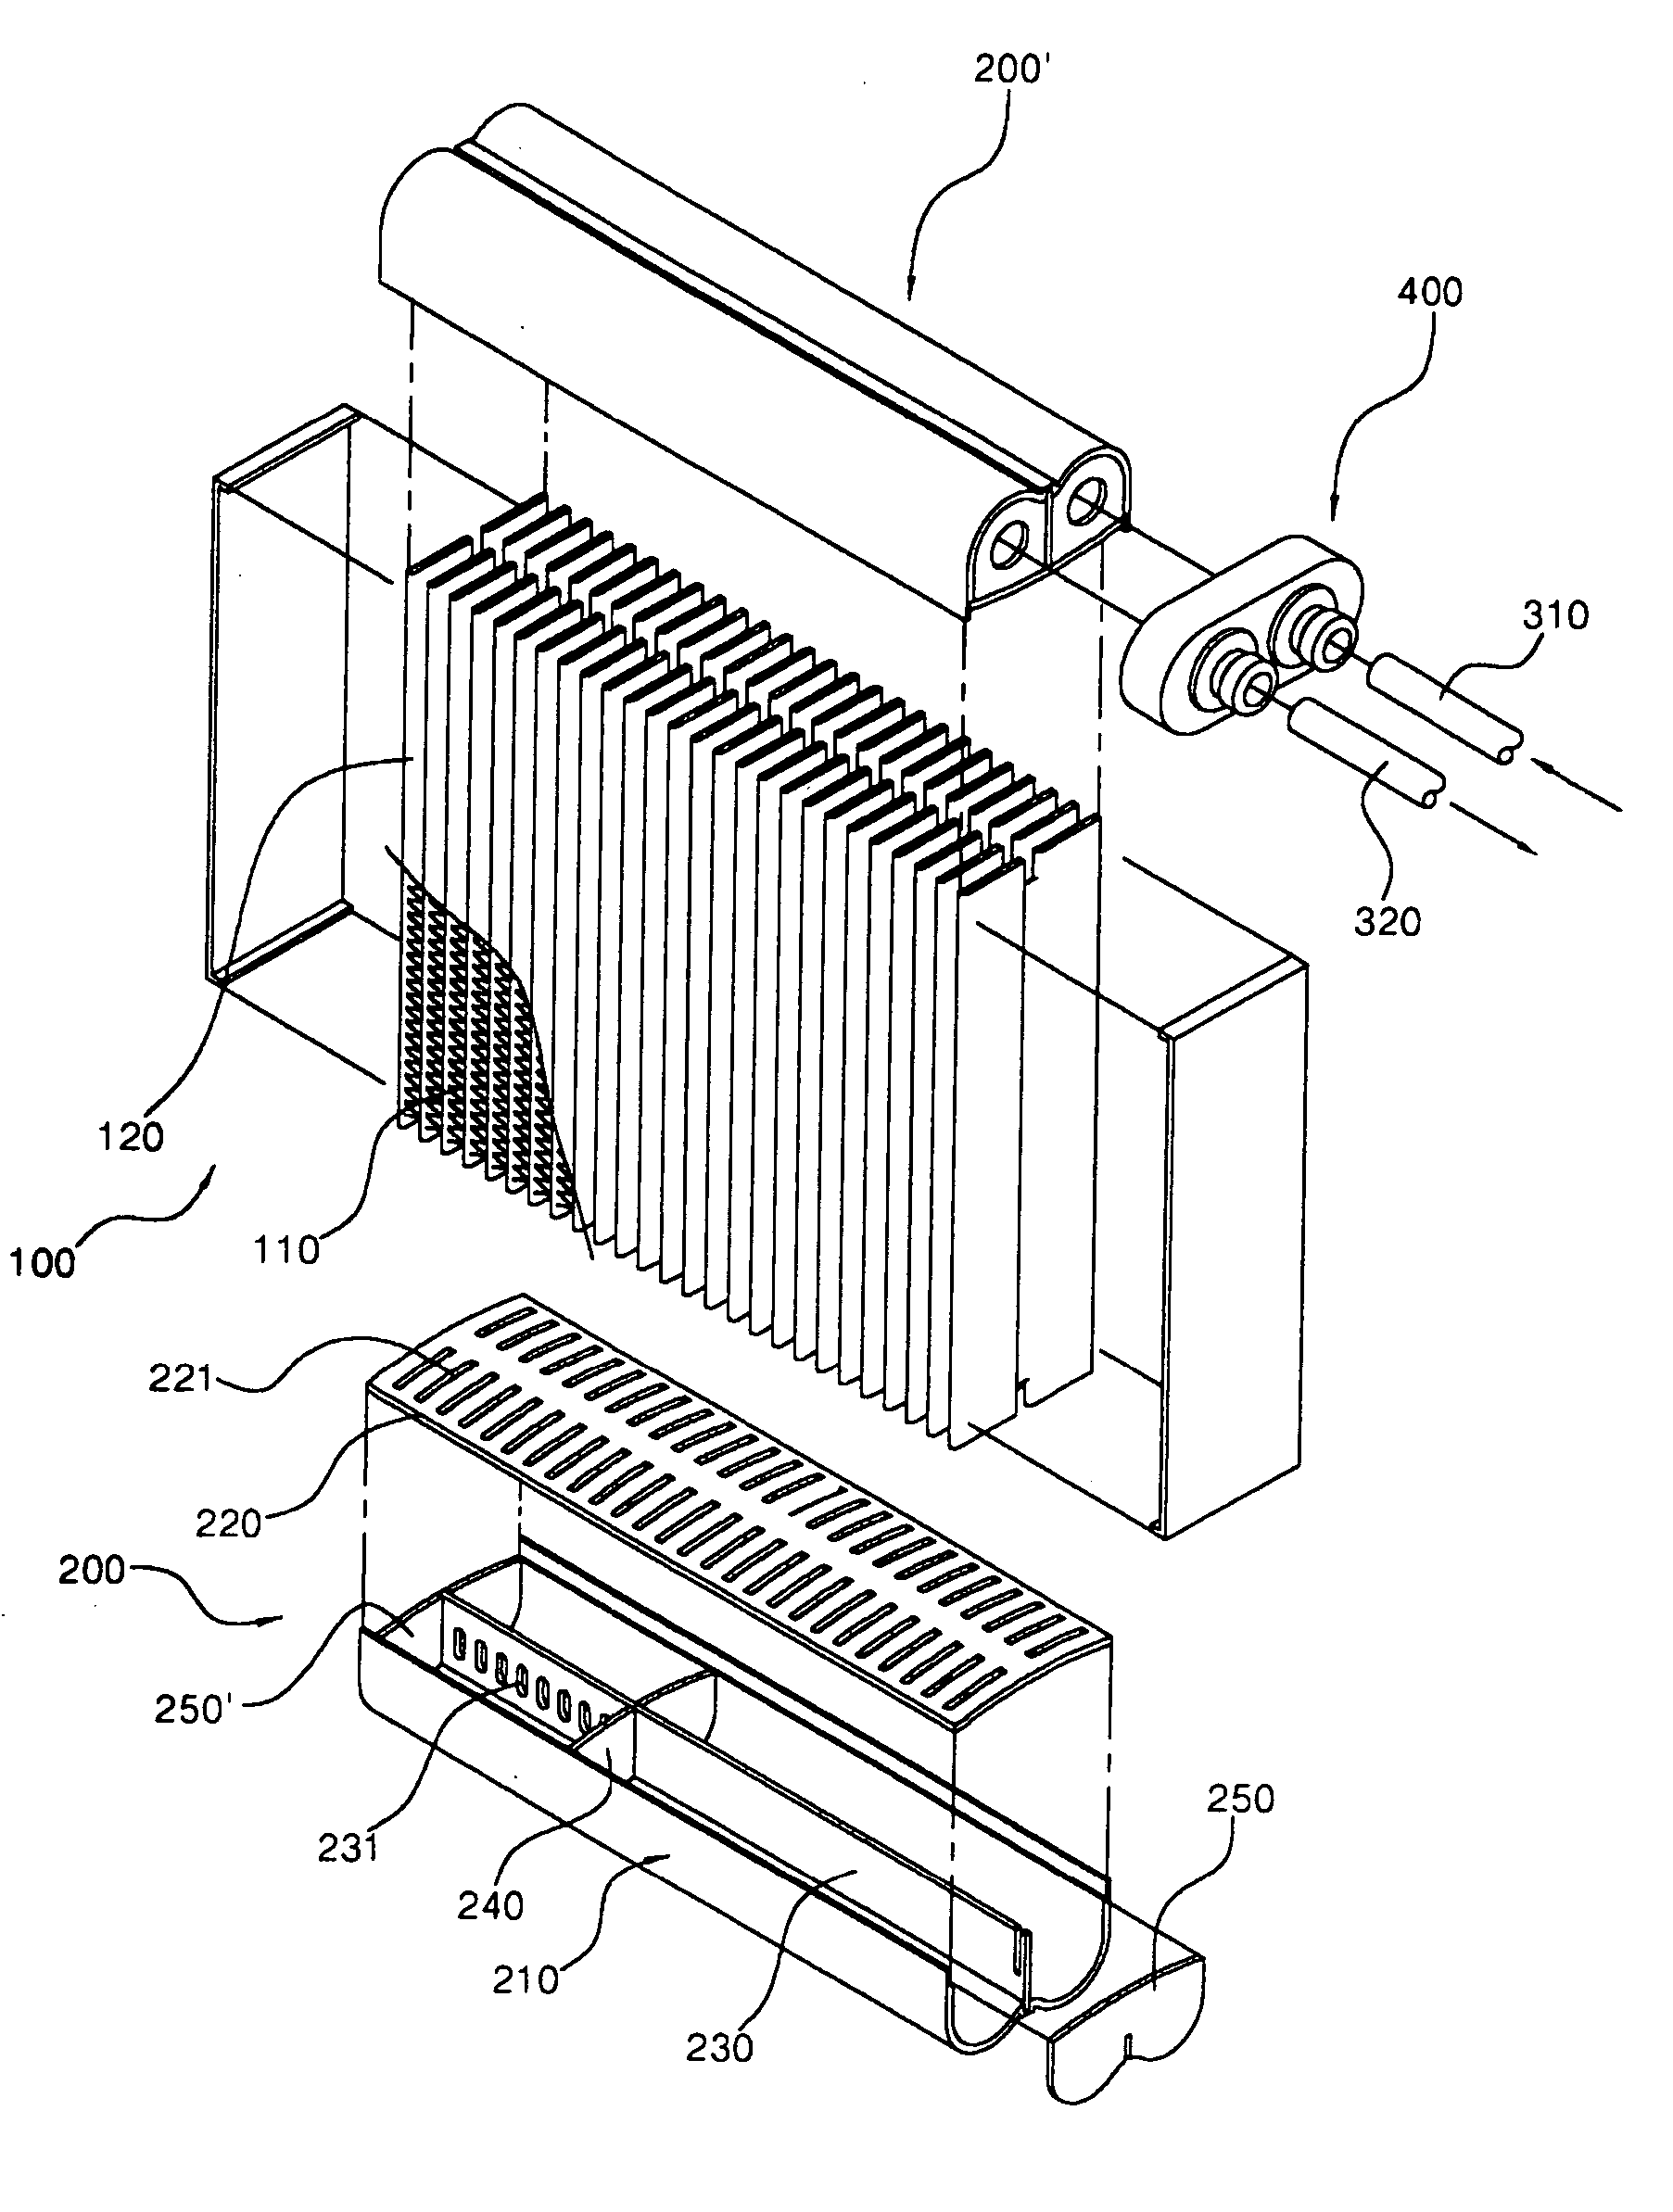 Header pipe evaporator for use in an automobile